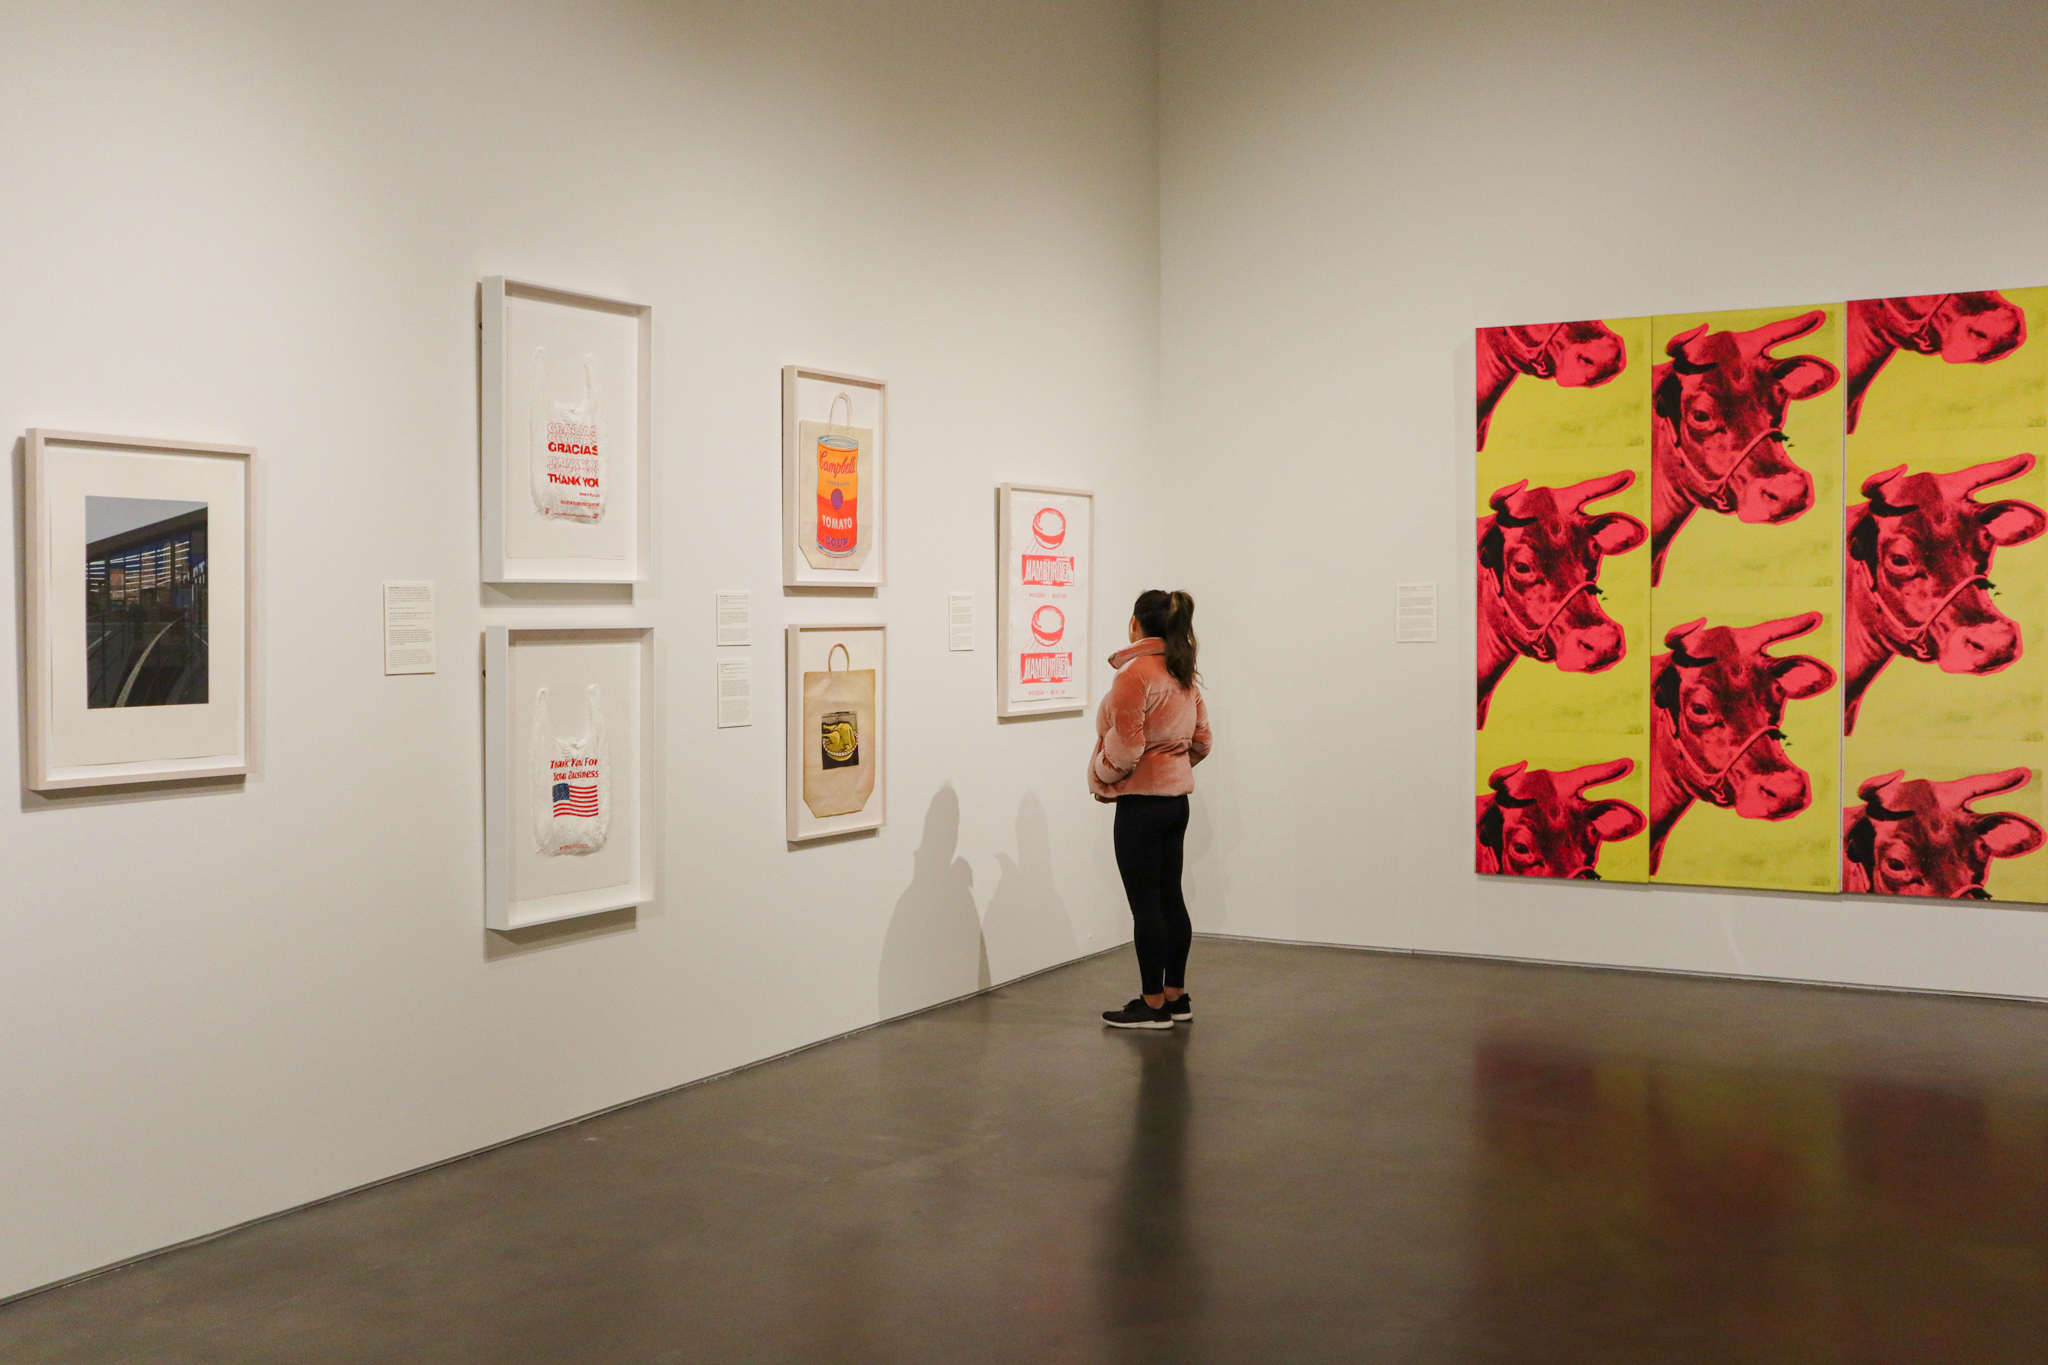 A person stands in a corner looking at hanging artworks. To their right is a print of a cow's head in pink, repeated, on a yellow background. In front of the person are six framed pieces. We can see grocery store bags in four of them.